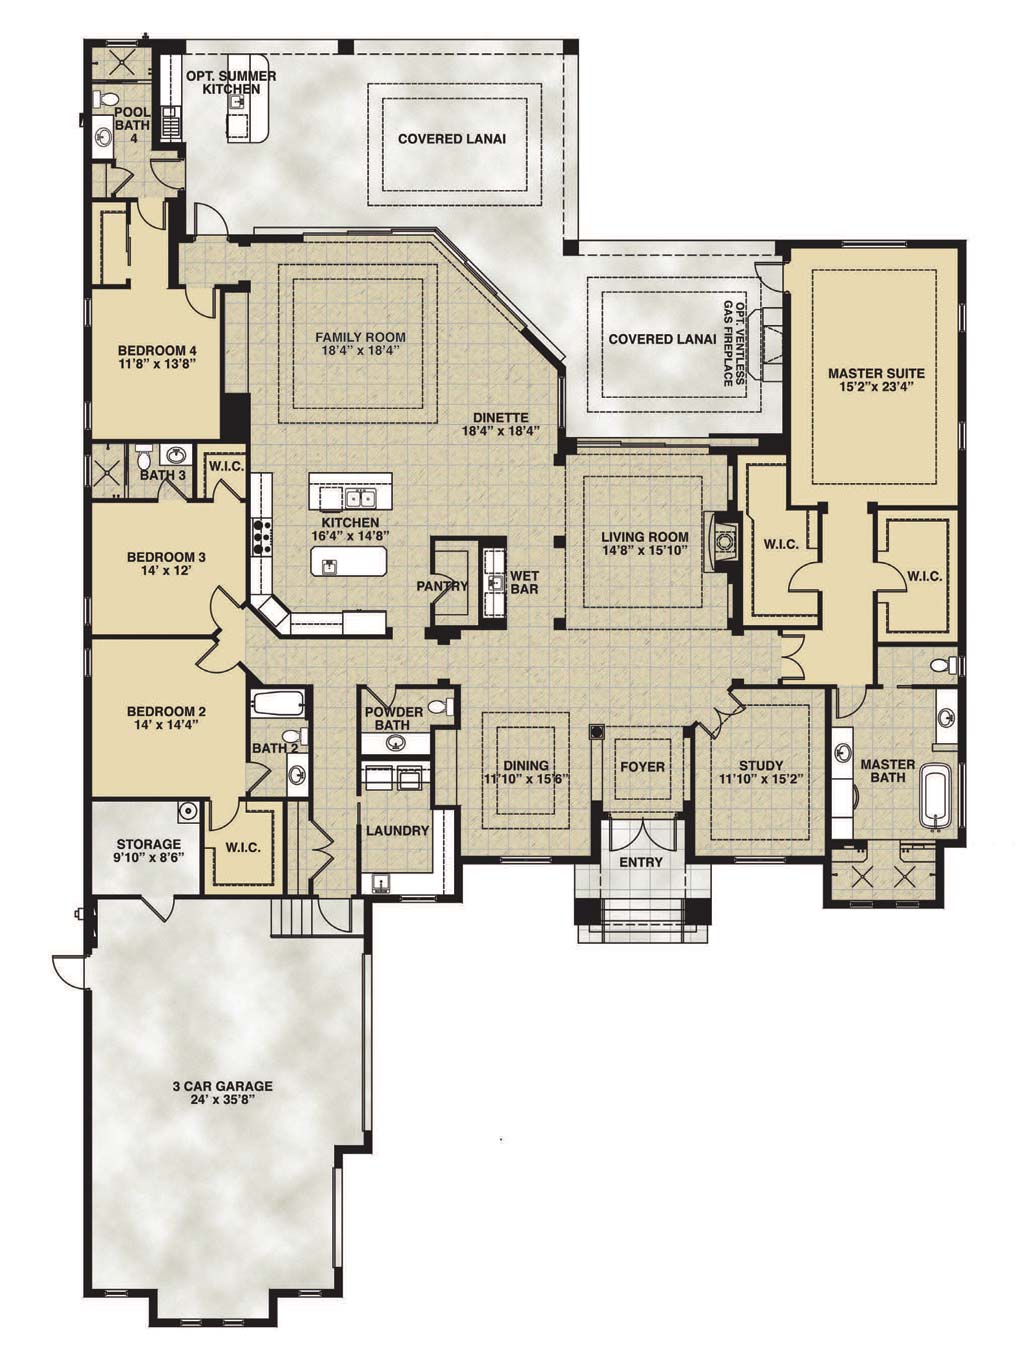 Stella Floor Plan in Bay Woods, Stock Construction, Four Bedroom / Four and One Half Bath / Living Room / Family Room / Dining Room / Study / Outdoor Living / 3-Car Garage